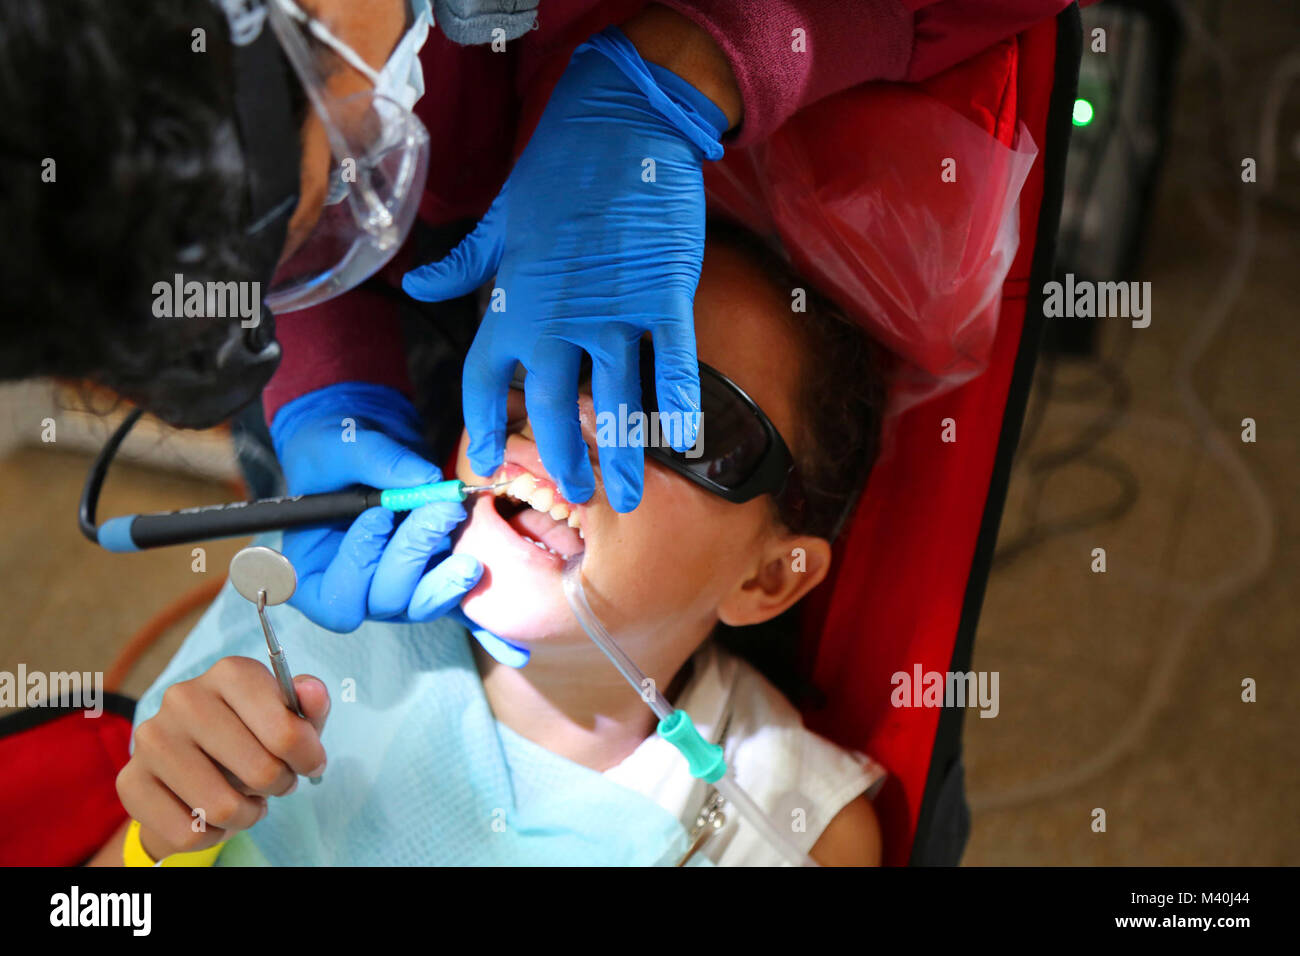 150423-A-ZA034-095 PUERTO BARRIOS, Guatemala (April 23, 2015) Janae Smart, a registered dental hygienist assigned to Naval Air Station Oceana, Virginia Beach, Va., performs a teeth cleaning at a medical site set up at Casa Social Del Maestro Prof. Leopoldo during Continuing Promise 2015.  2015. Continuing Promise is a U.S. Southern Command-sponsored and U.S. Naval Forces Southern Command/U.S. 4th Fleet-conducted deployment to conduct civil-military operations including humanitarian-civil assistance, subject matter expert exchanges, medical, dental, veterinary and engineering support and disast Stock Photo